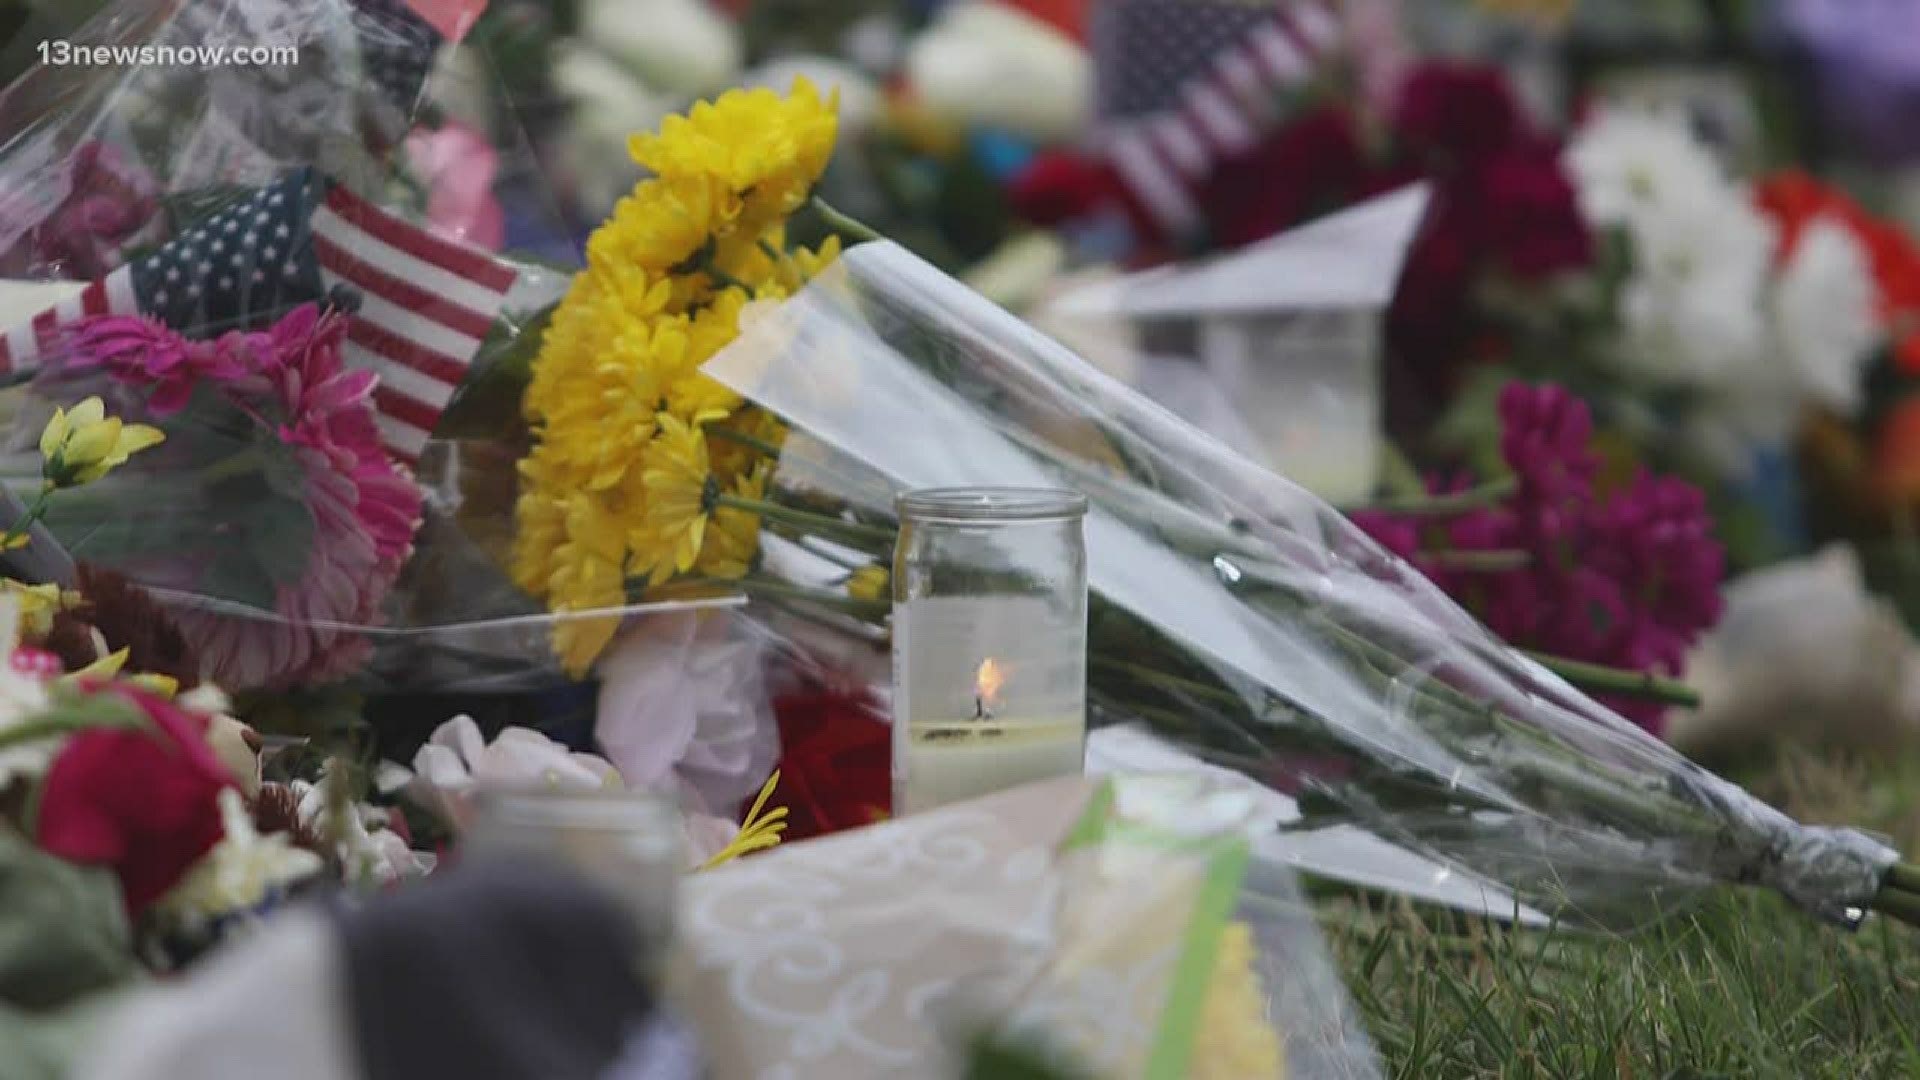 City leaders and mental health experts are working to create a permanent memorial to the 12 people who lost their lives in the Virginia Beach mass shooting.